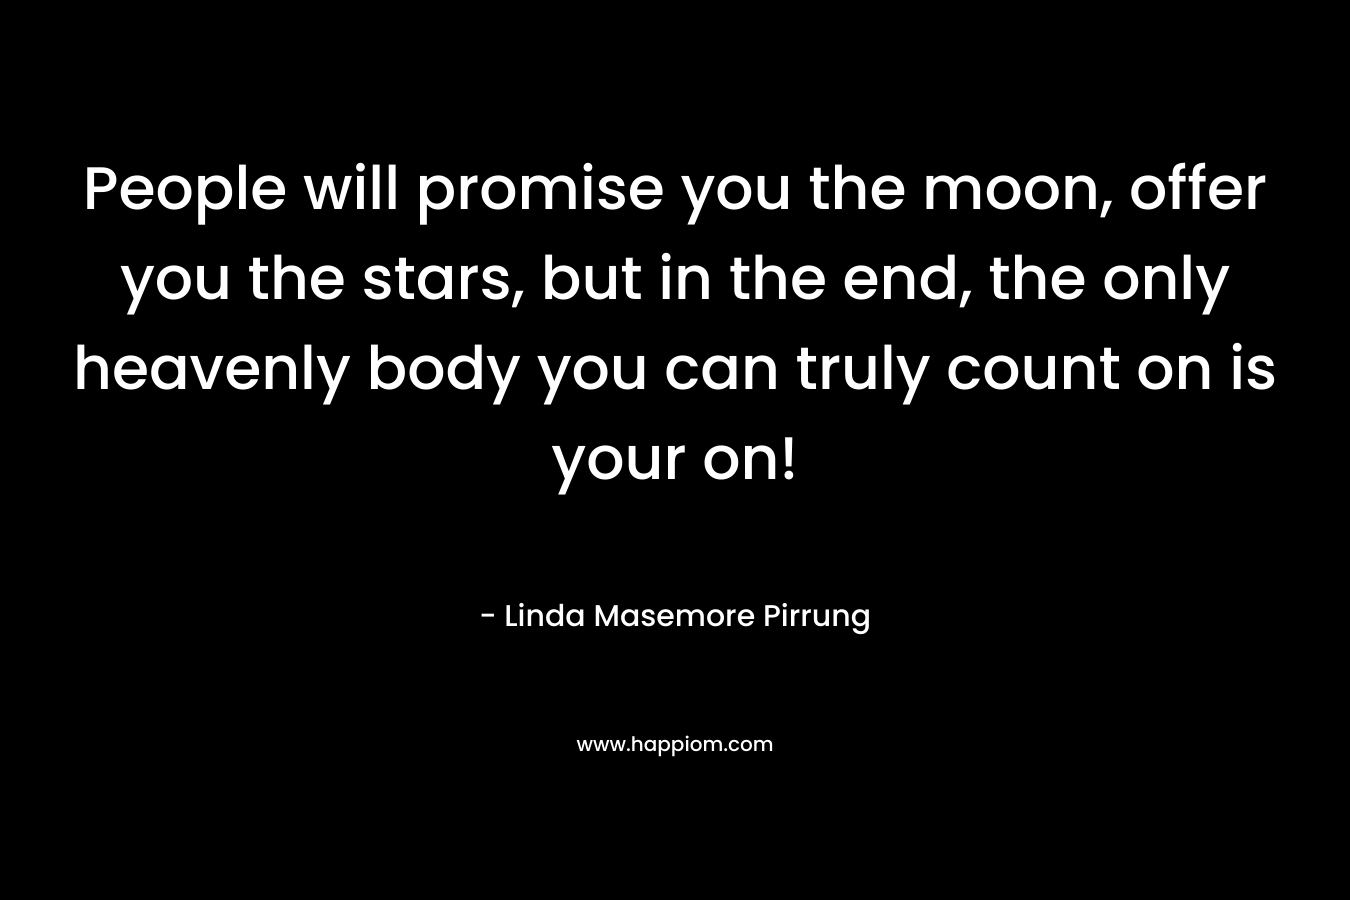 People will promise you the moon, offer you the stars, but in the end, the only heavenly body you can truly count on is your on! – Linda Masemore Pirrung